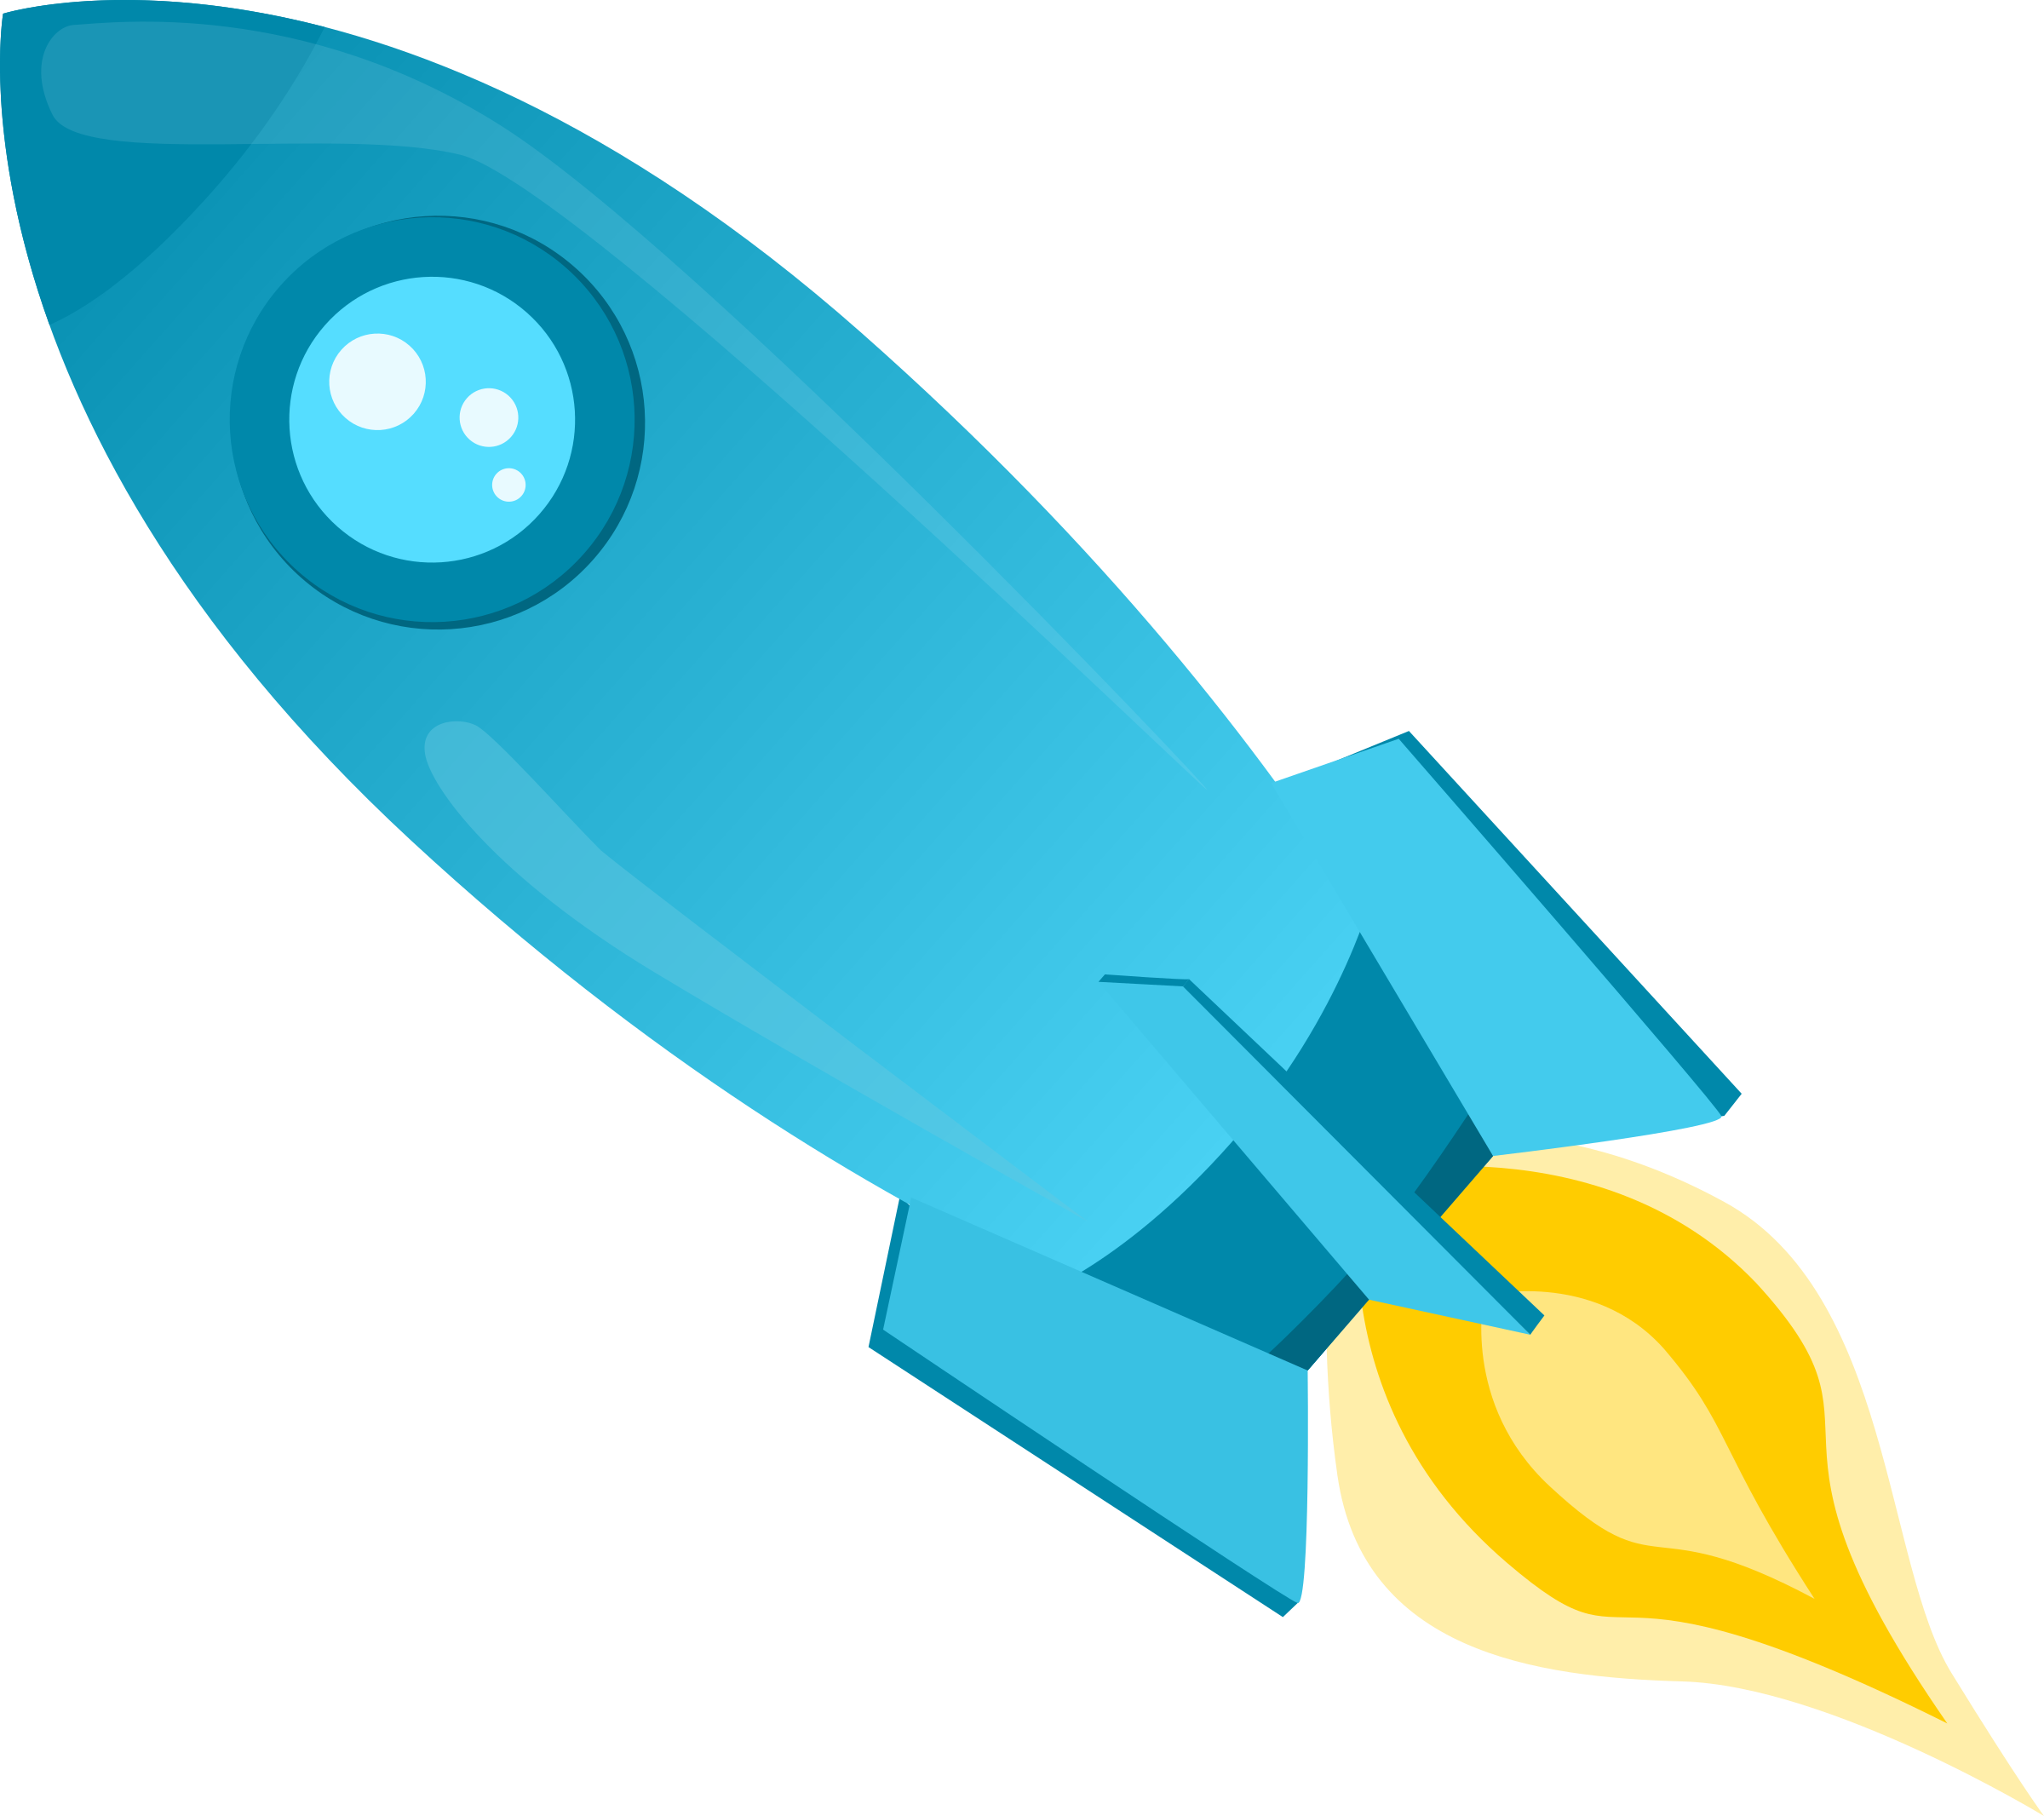 Rocket PNG Image HD - PNG All | PNG All